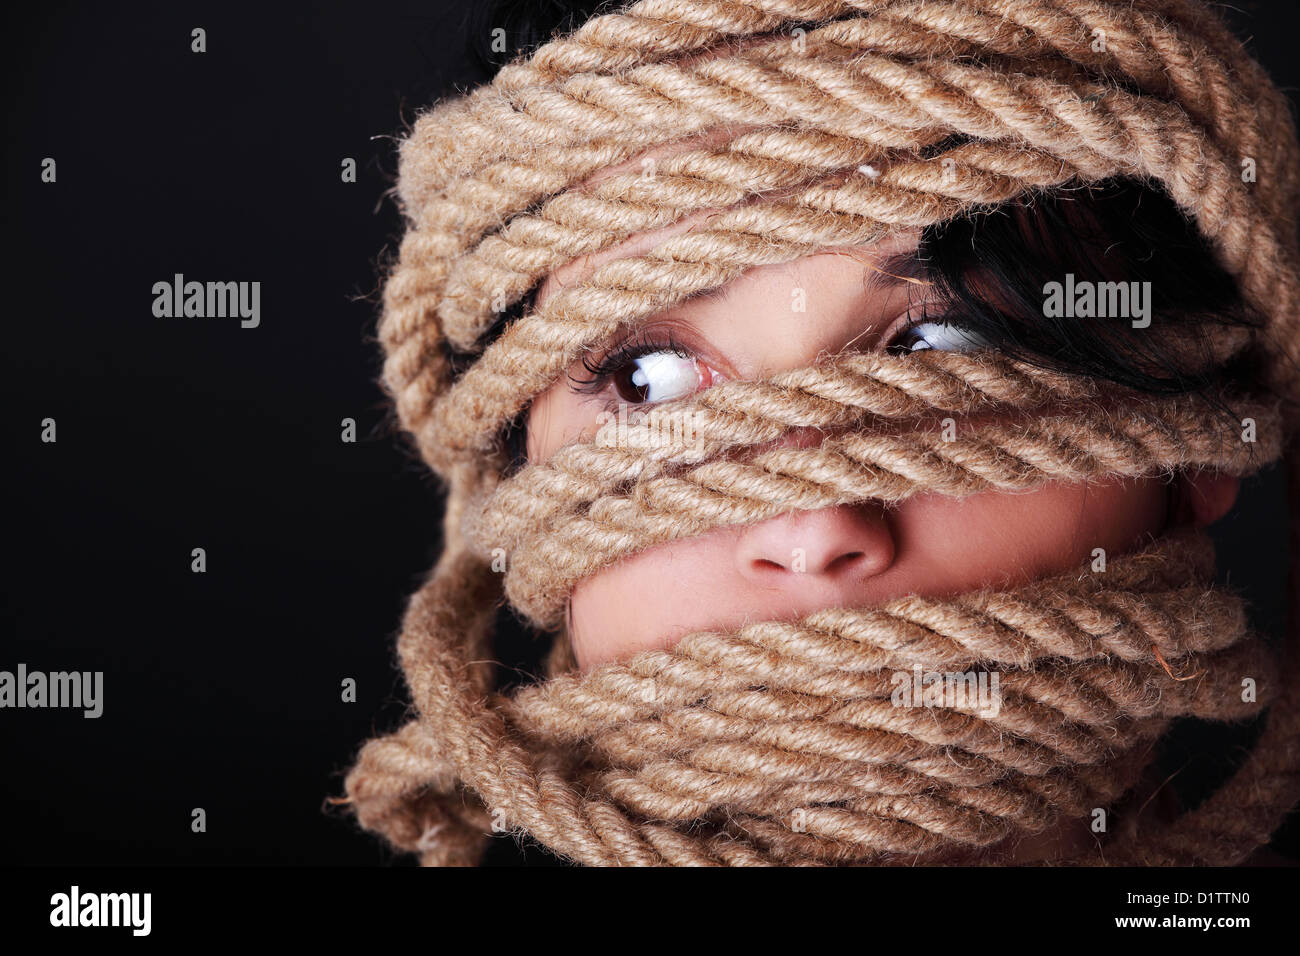 Tied up scared woman face. Violence concept.  Stock Photo